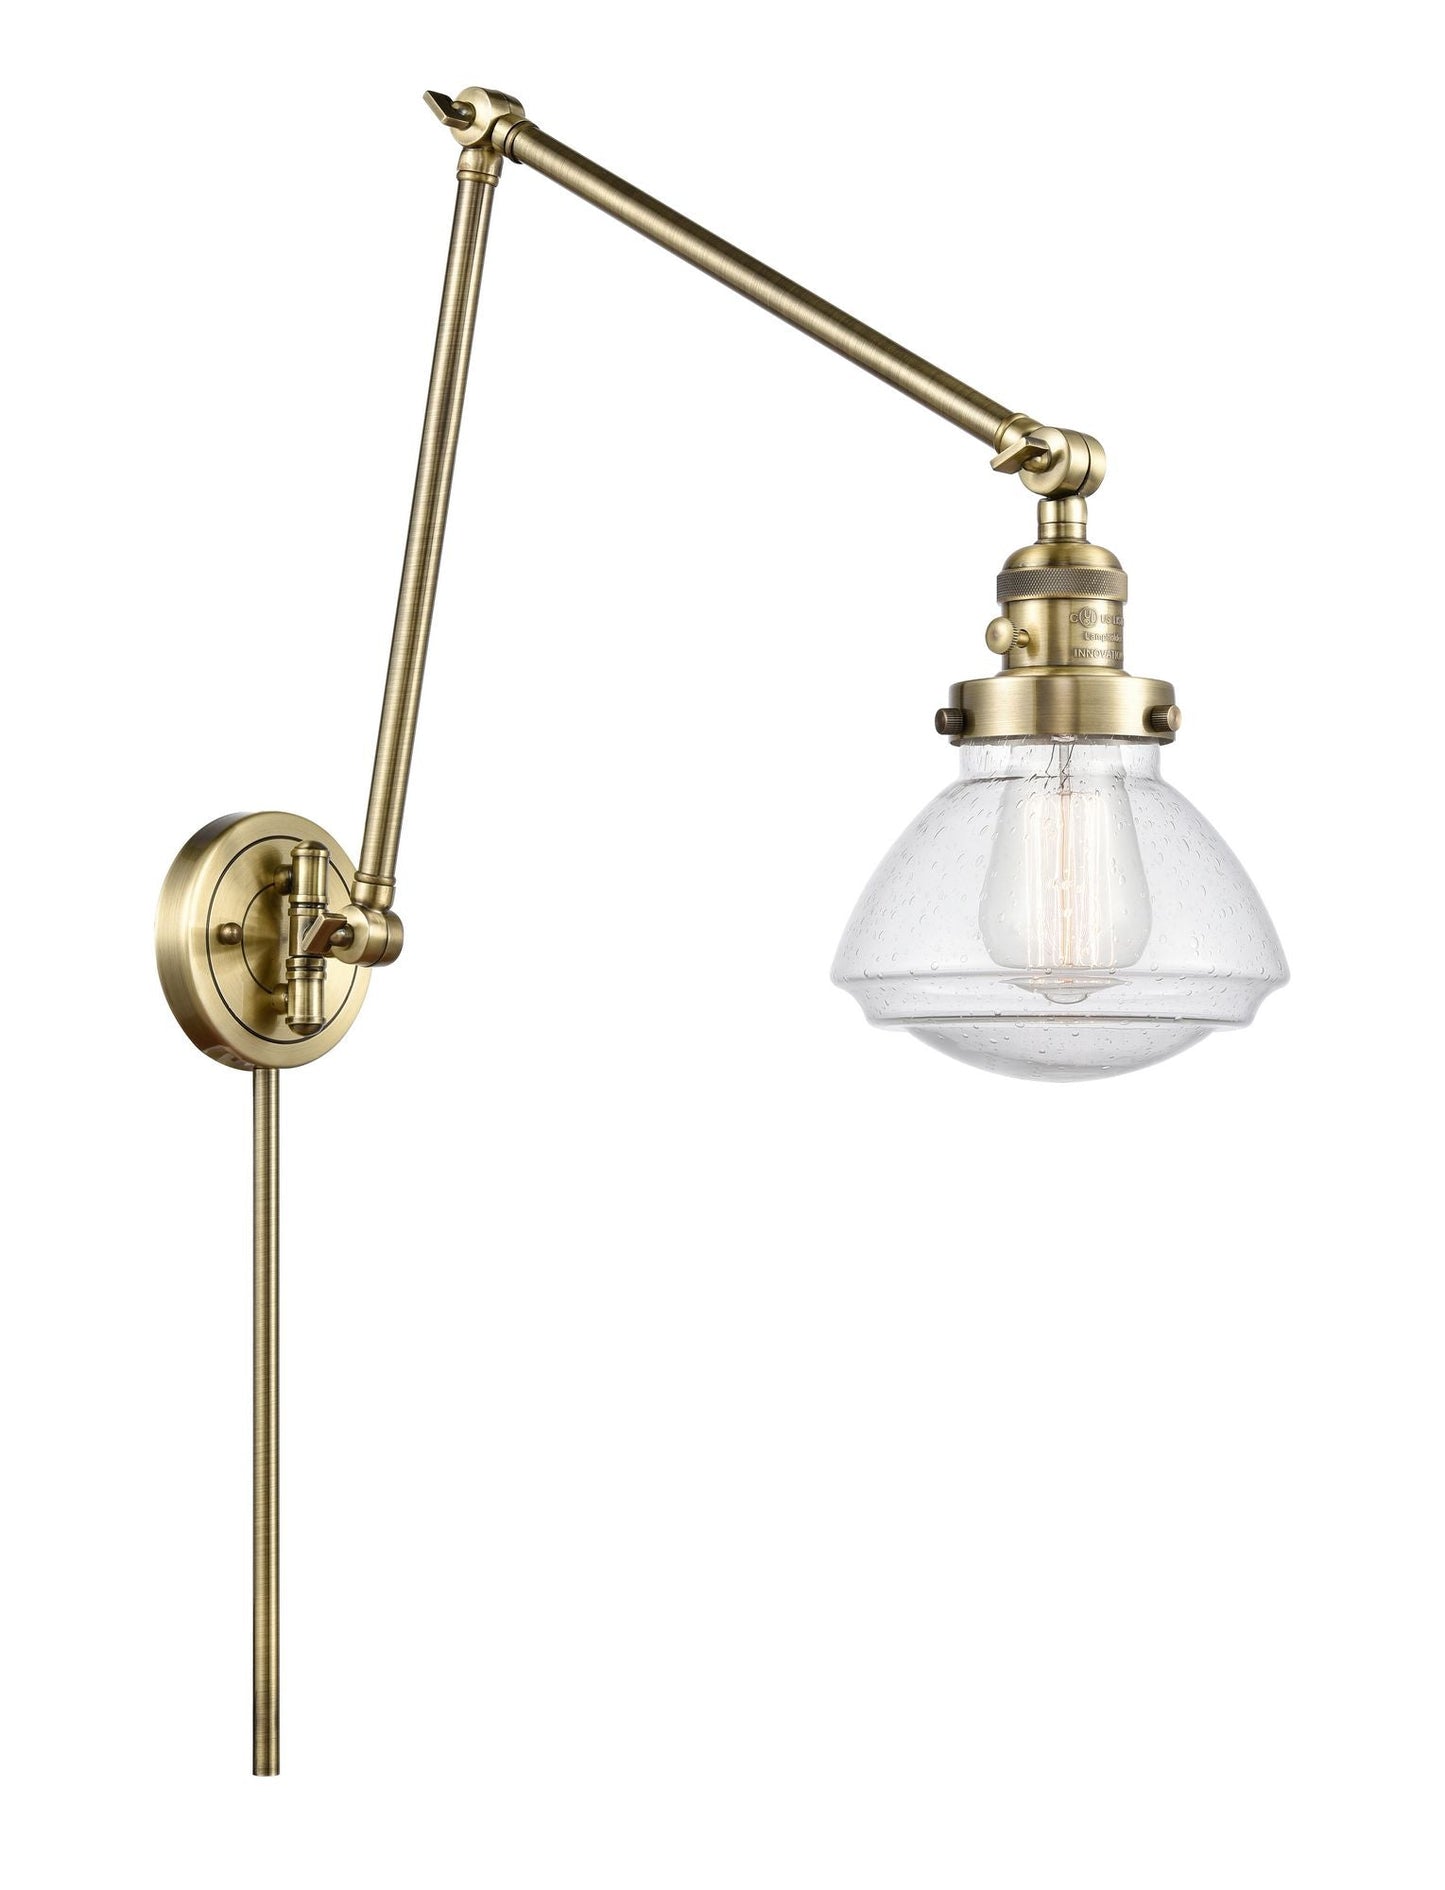 1-Light 8.75" Olean Swing Arm With Switch - Bell-Urn Seedy Glass - Choice of Finish And Incandesent Or LED Bulbs